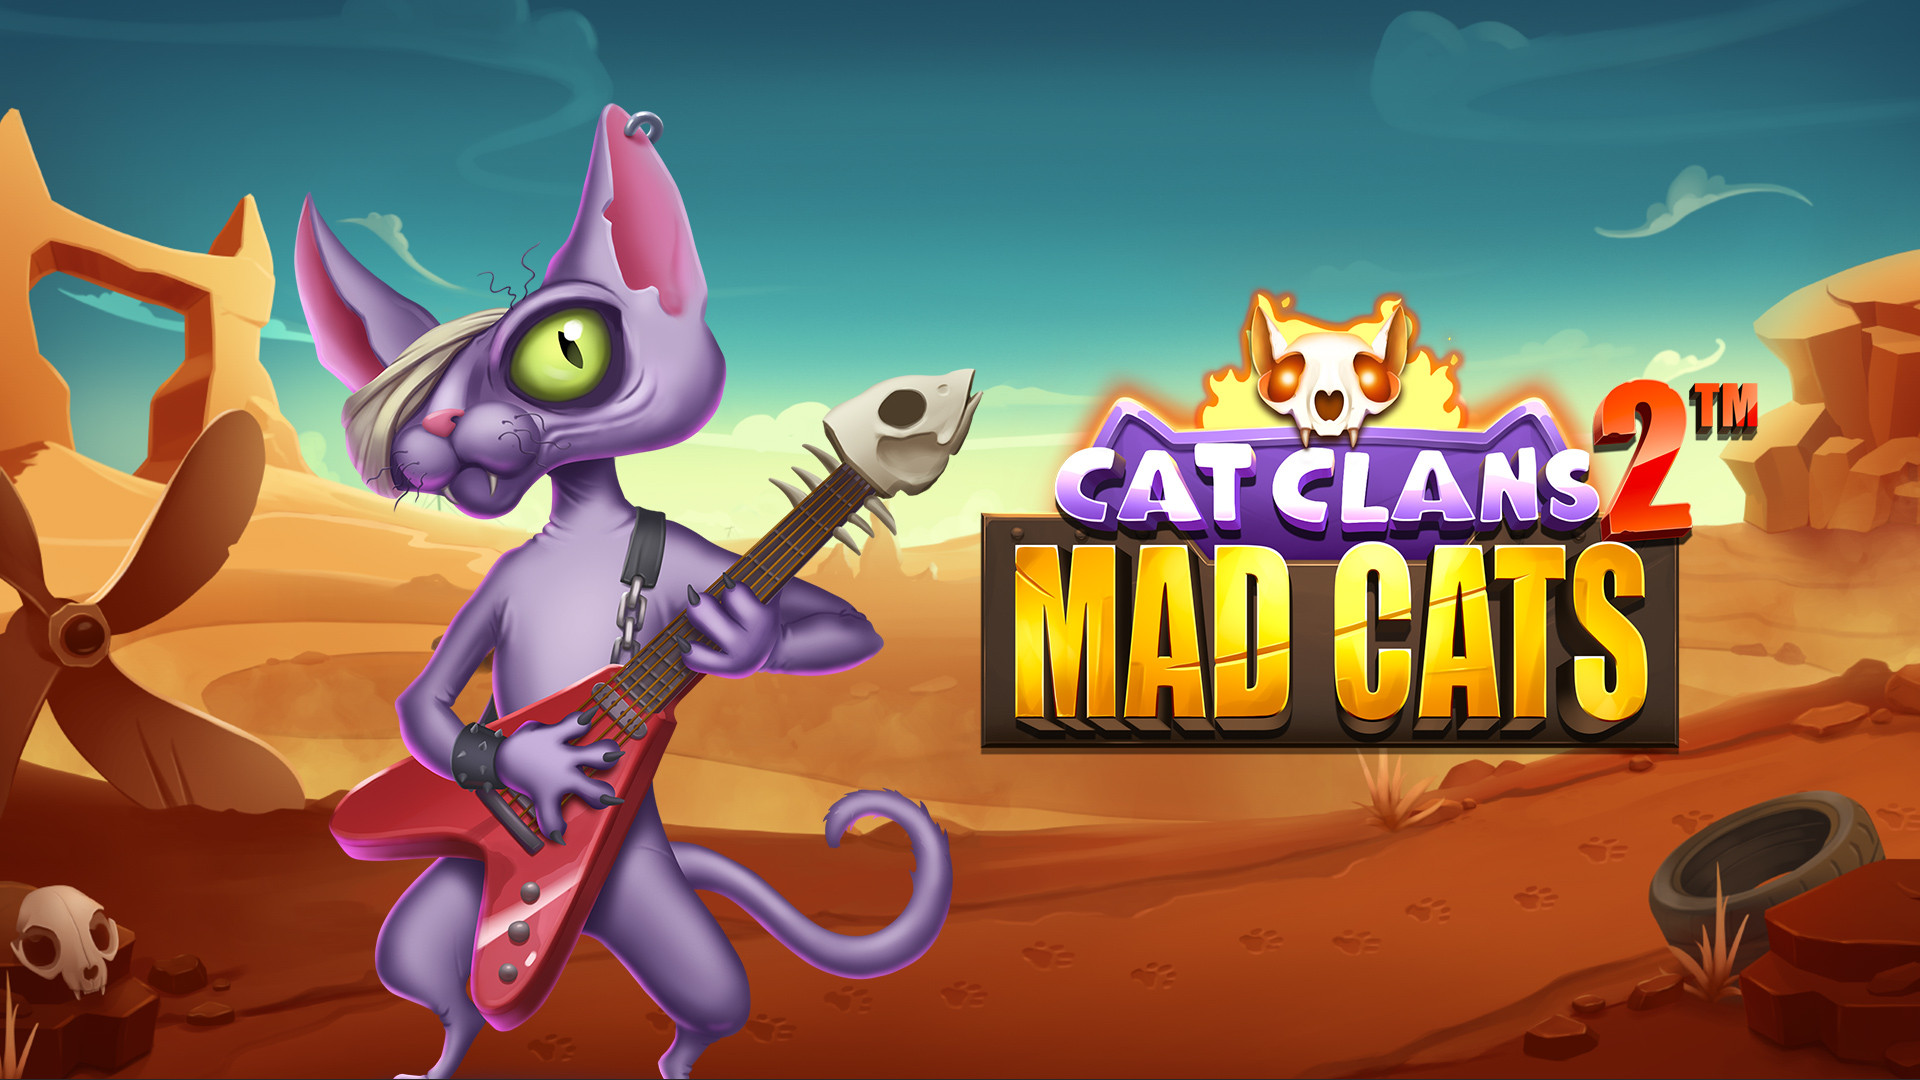 Cat Clans 2 - Mad Cats